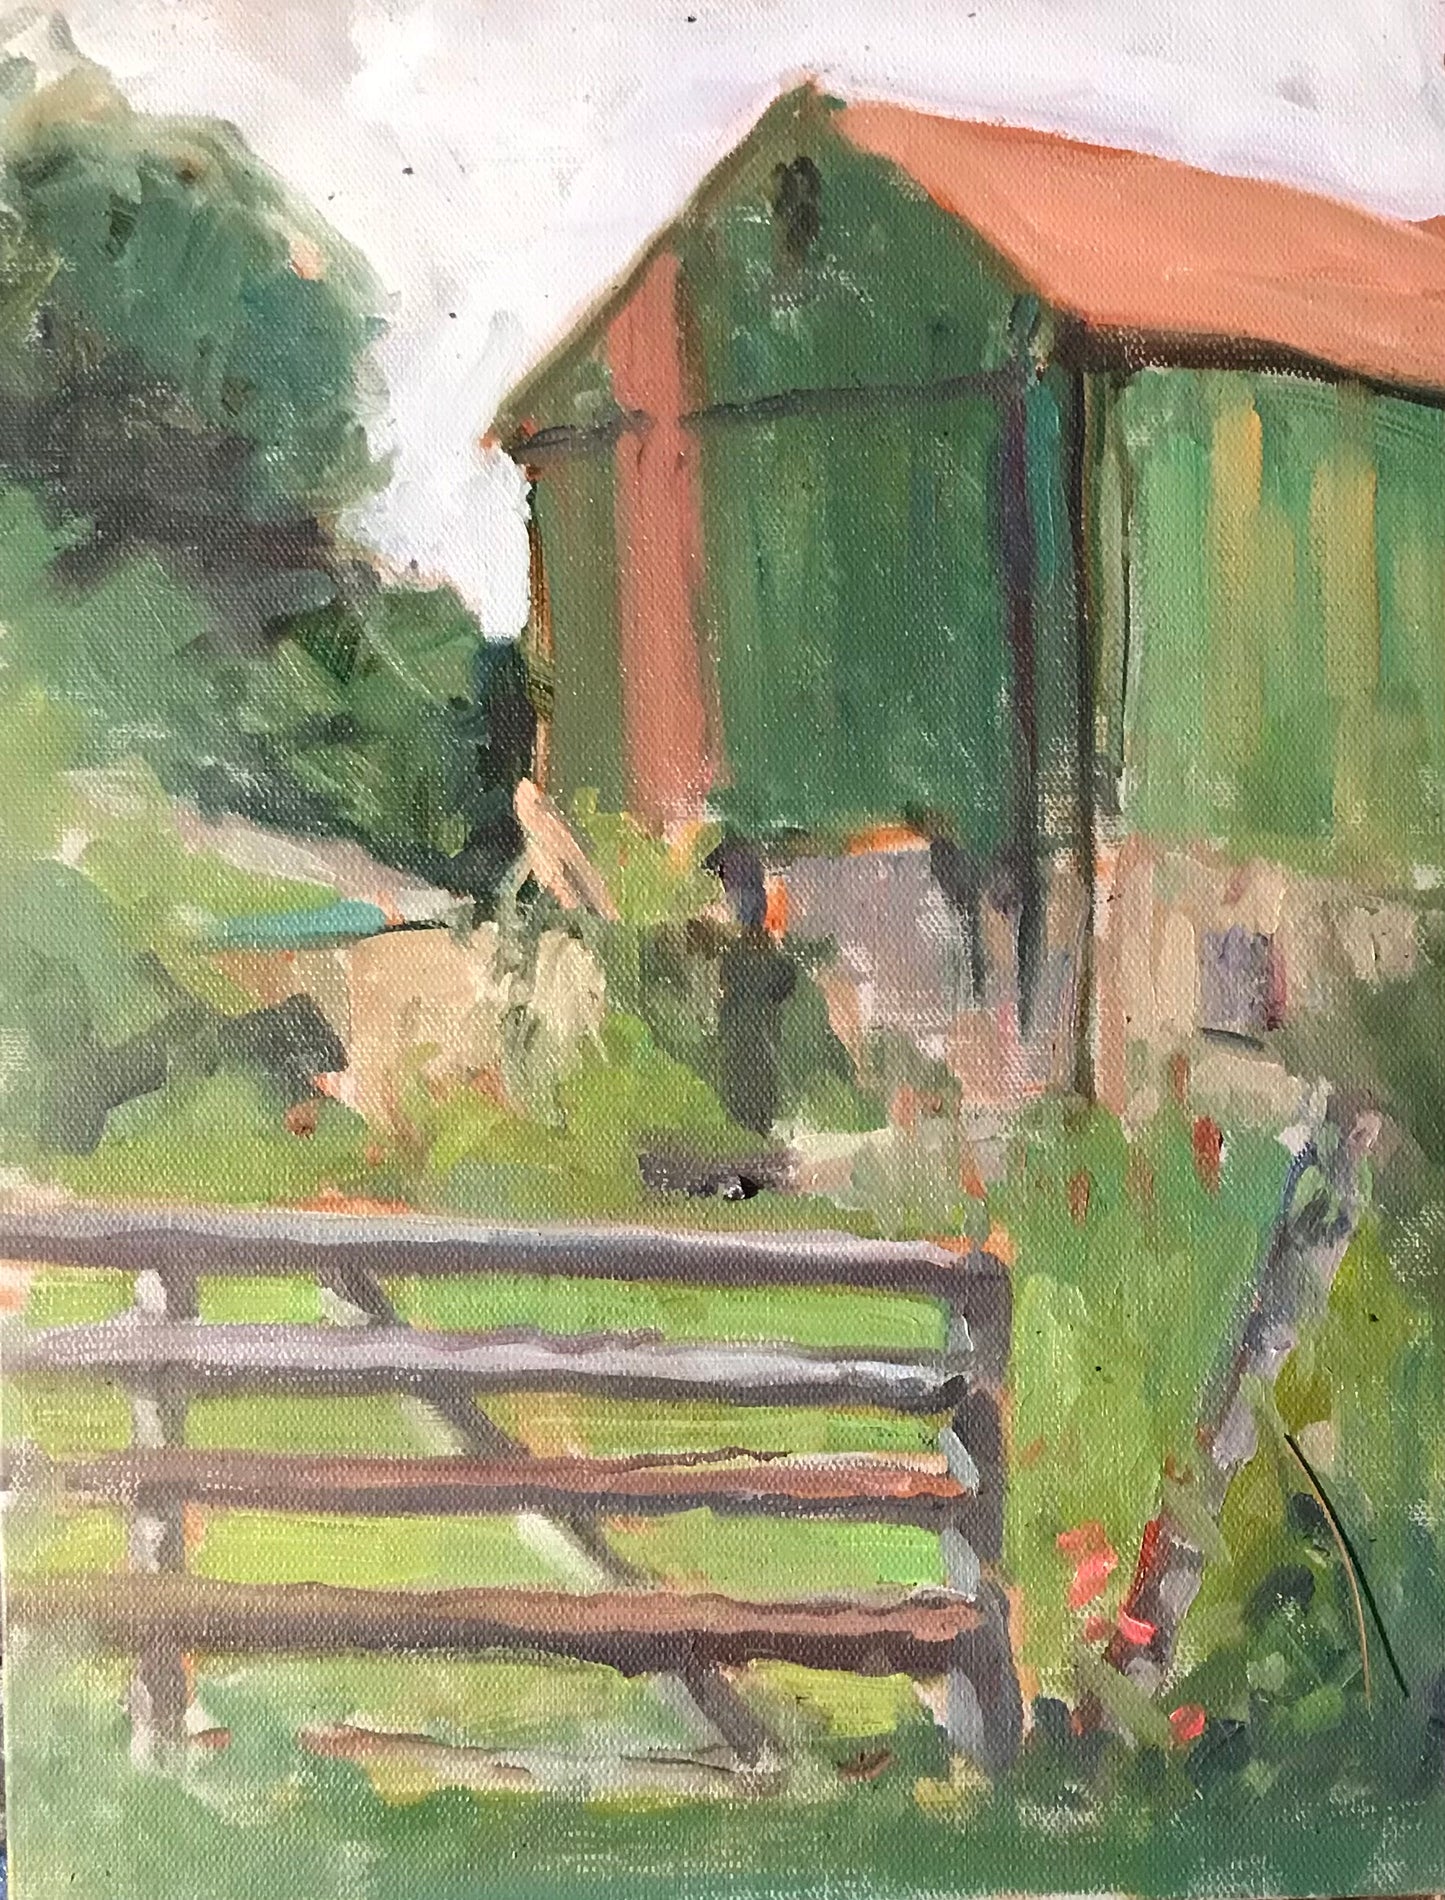 The Barn at Camp's Flat (14 x 11 Inches)